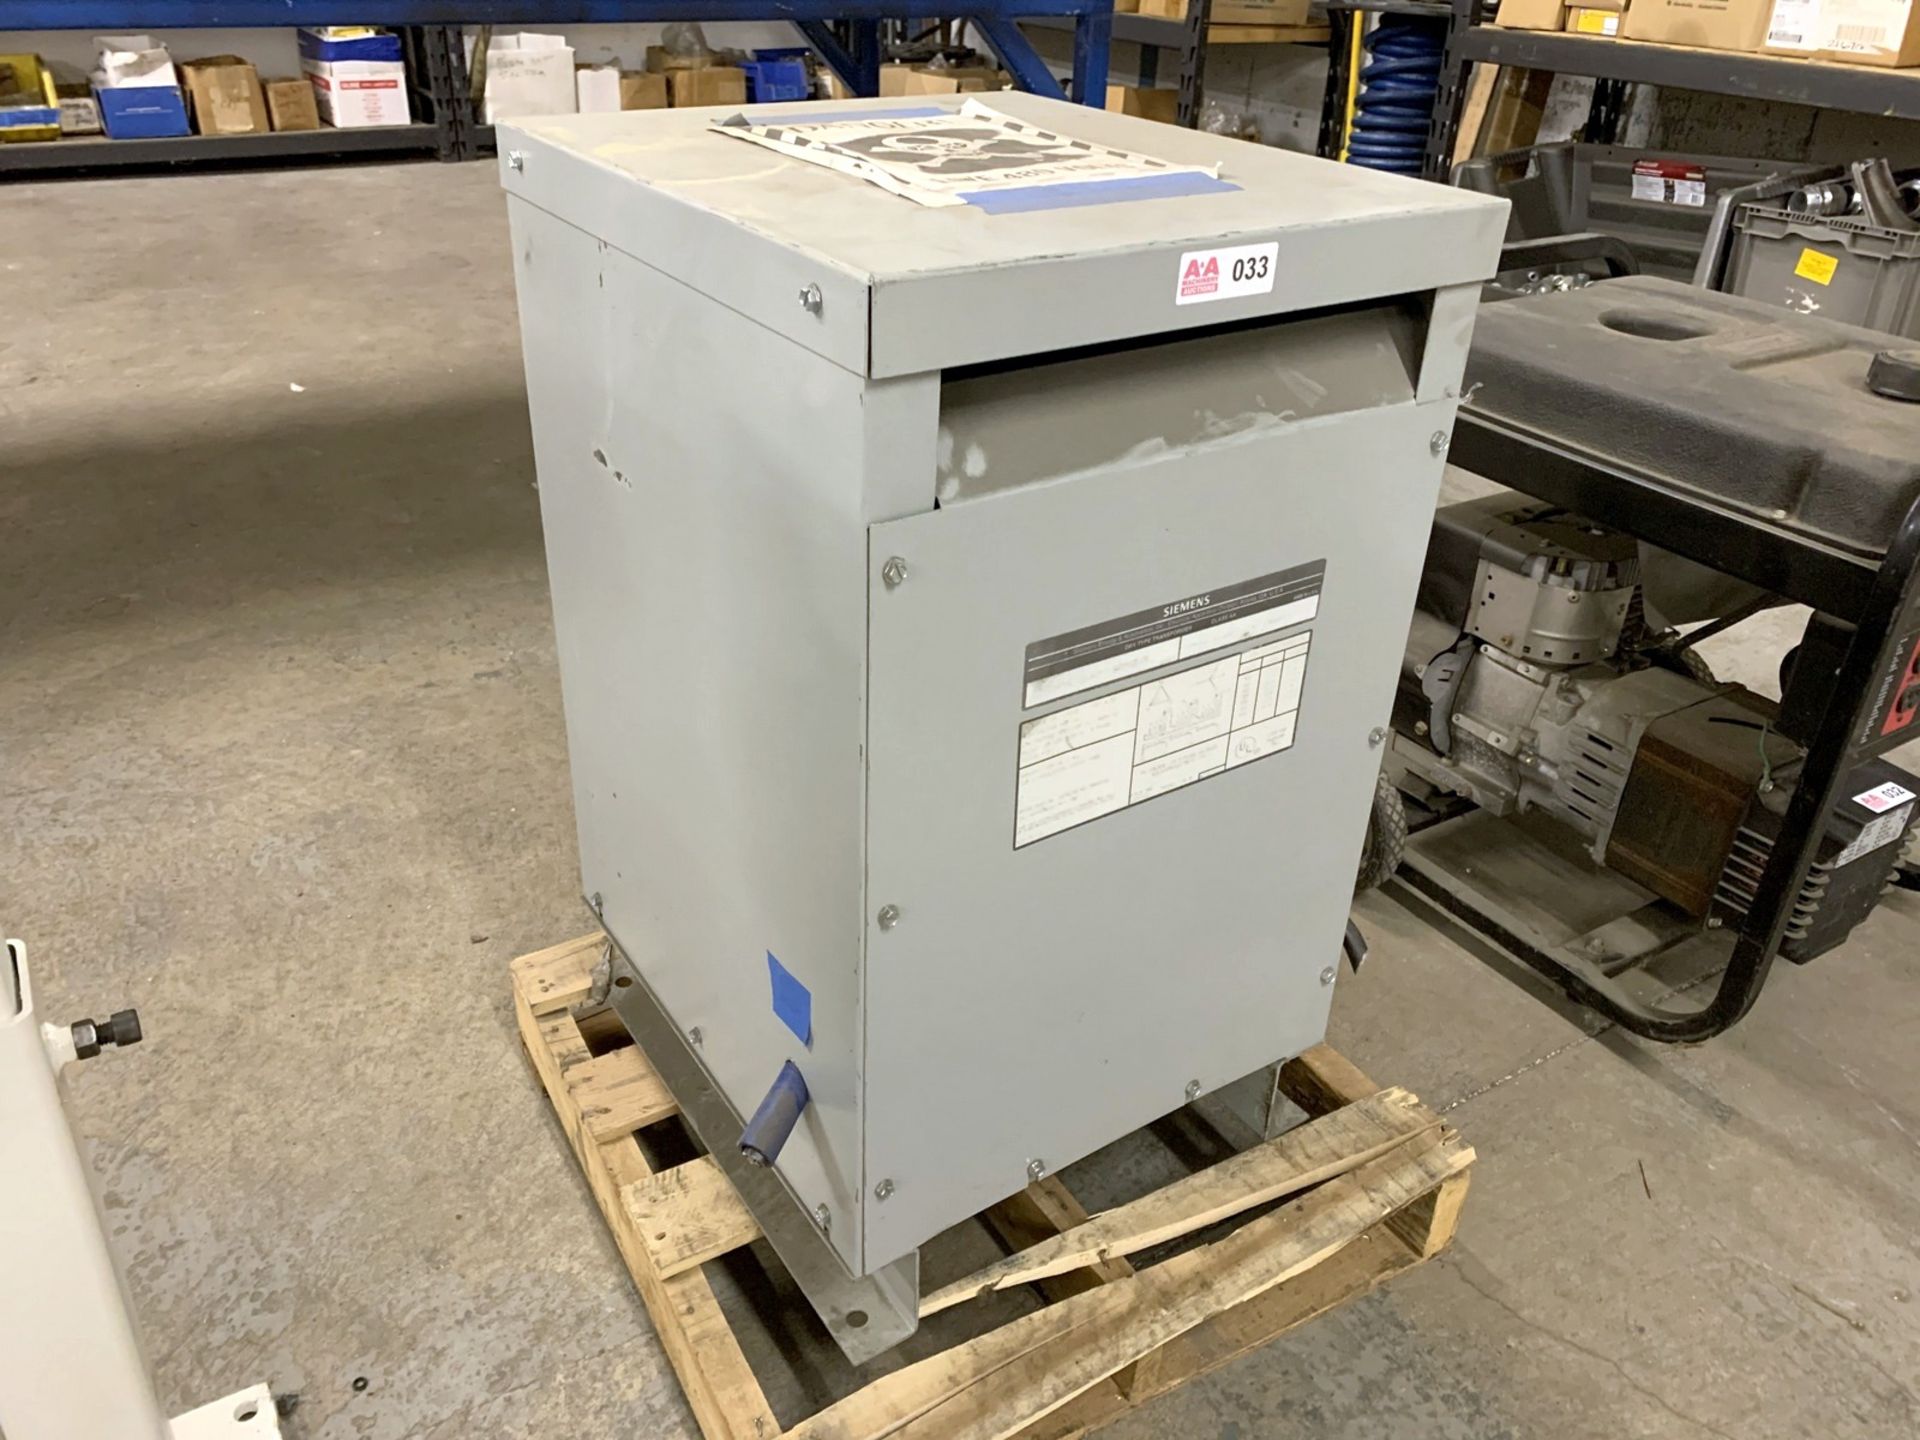 Siemens Cat. No. 3F3Y015 Transformer, 15KVA, 3-Phase (All Items MUST be Removed by Thursday, - Image 2 of 4